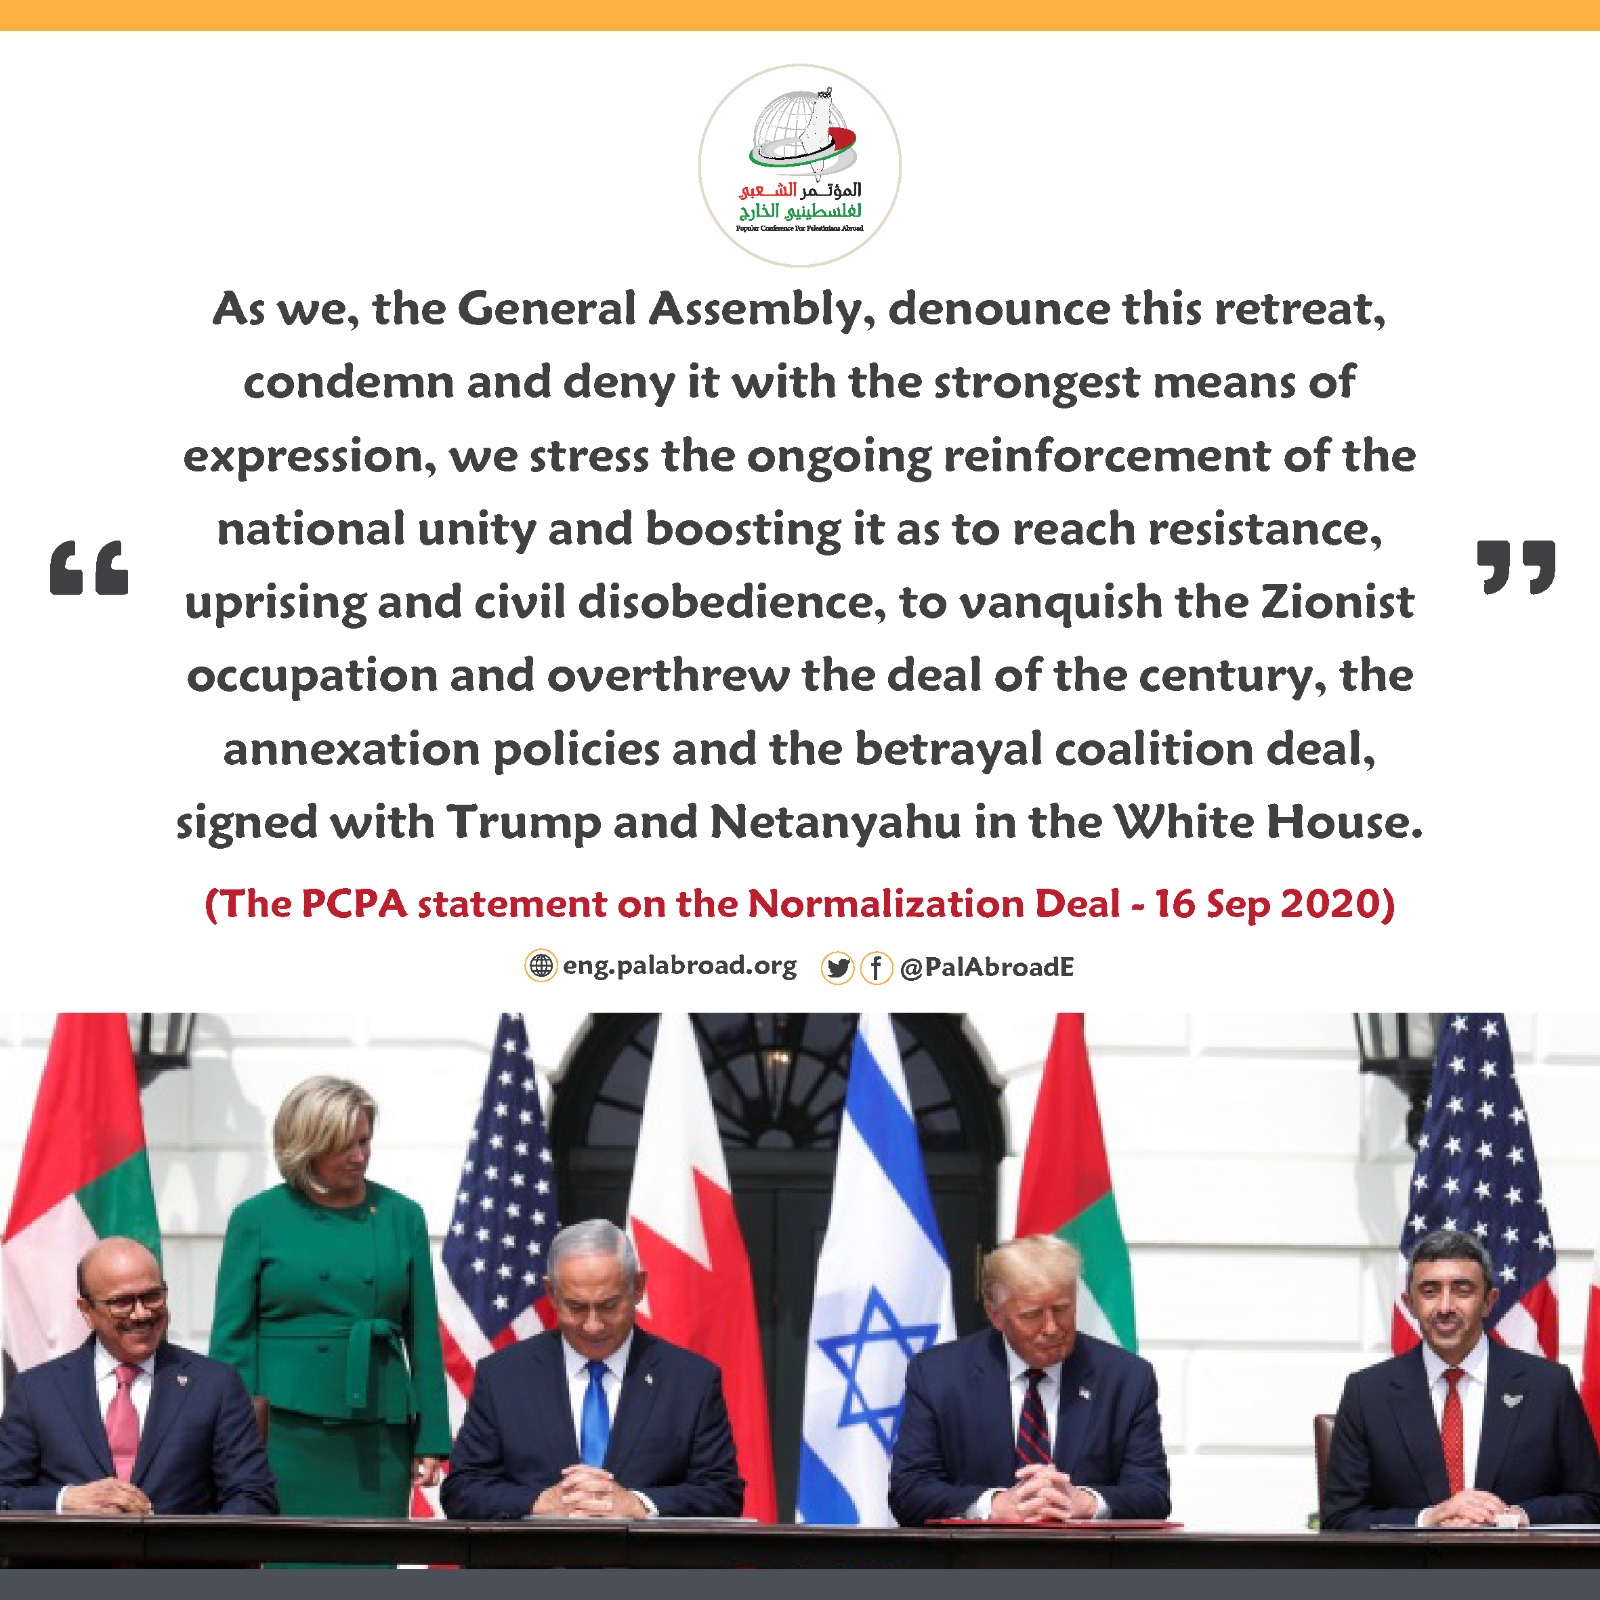 PCPA: The Normalization Deal is a Quitclaim Deed of their Arab Duty towards the Palestinian Cause